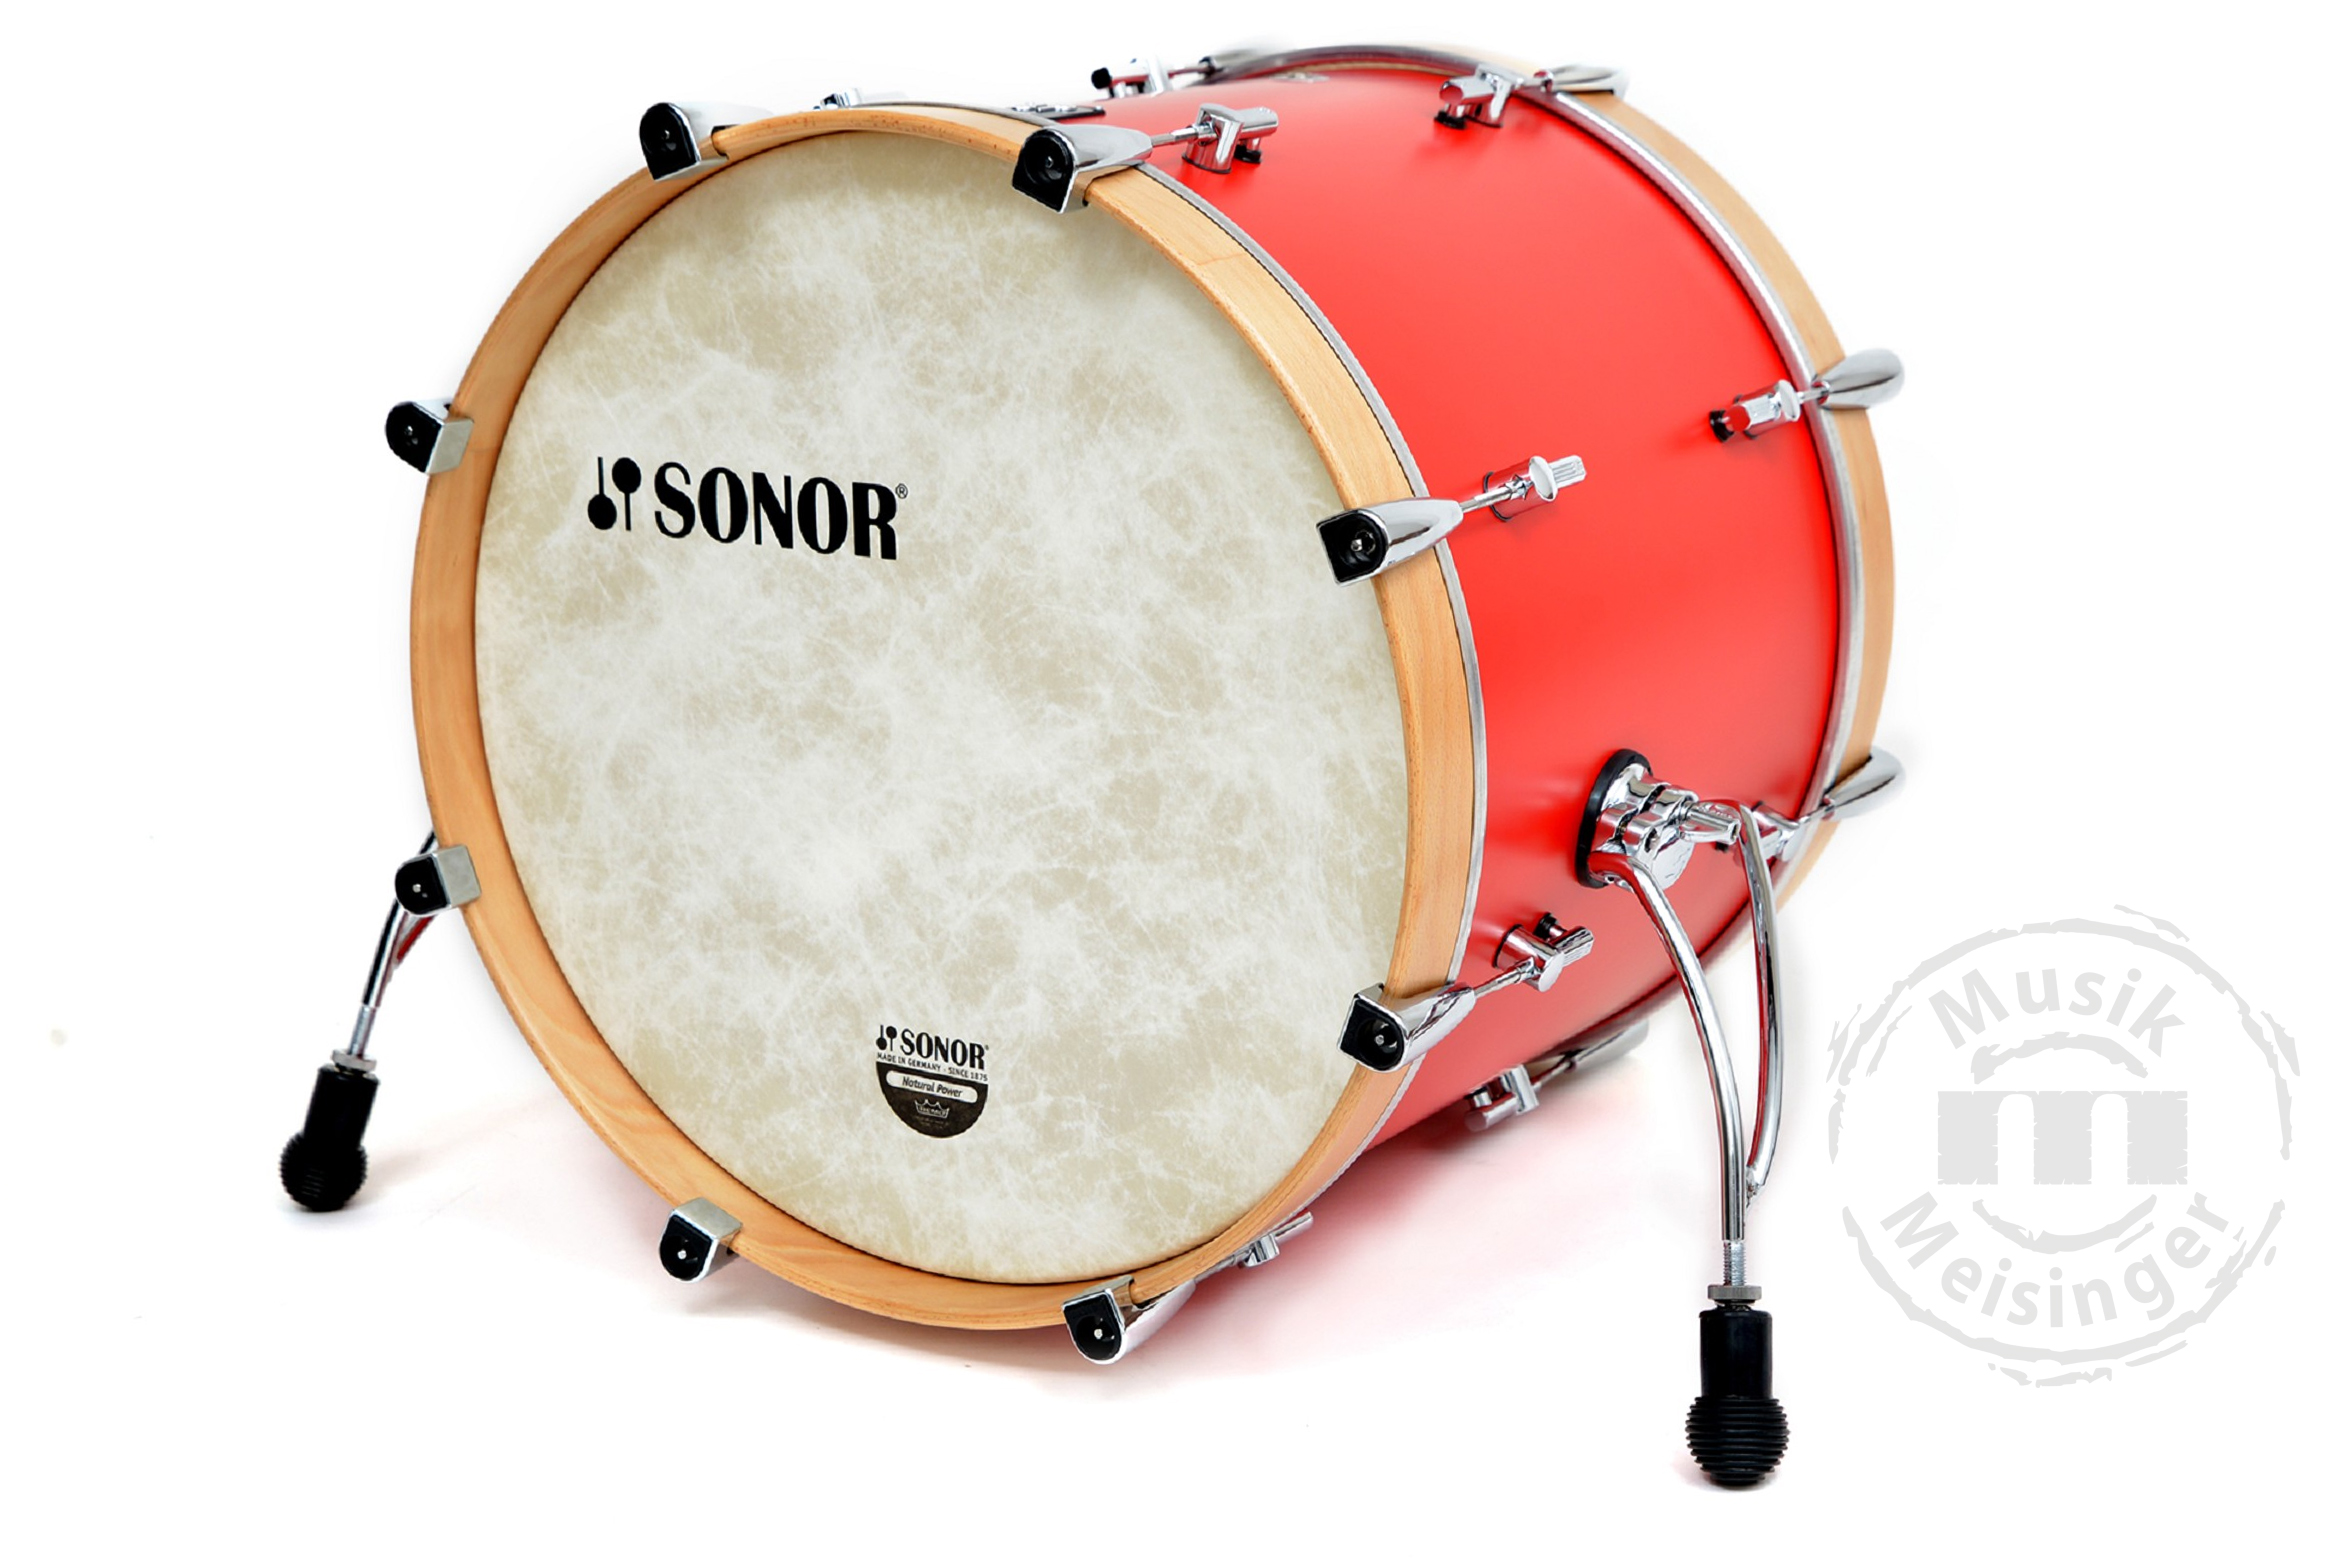 Sonor SQ1 Shell Set Hot Rod Red 20BD/12T/14FT